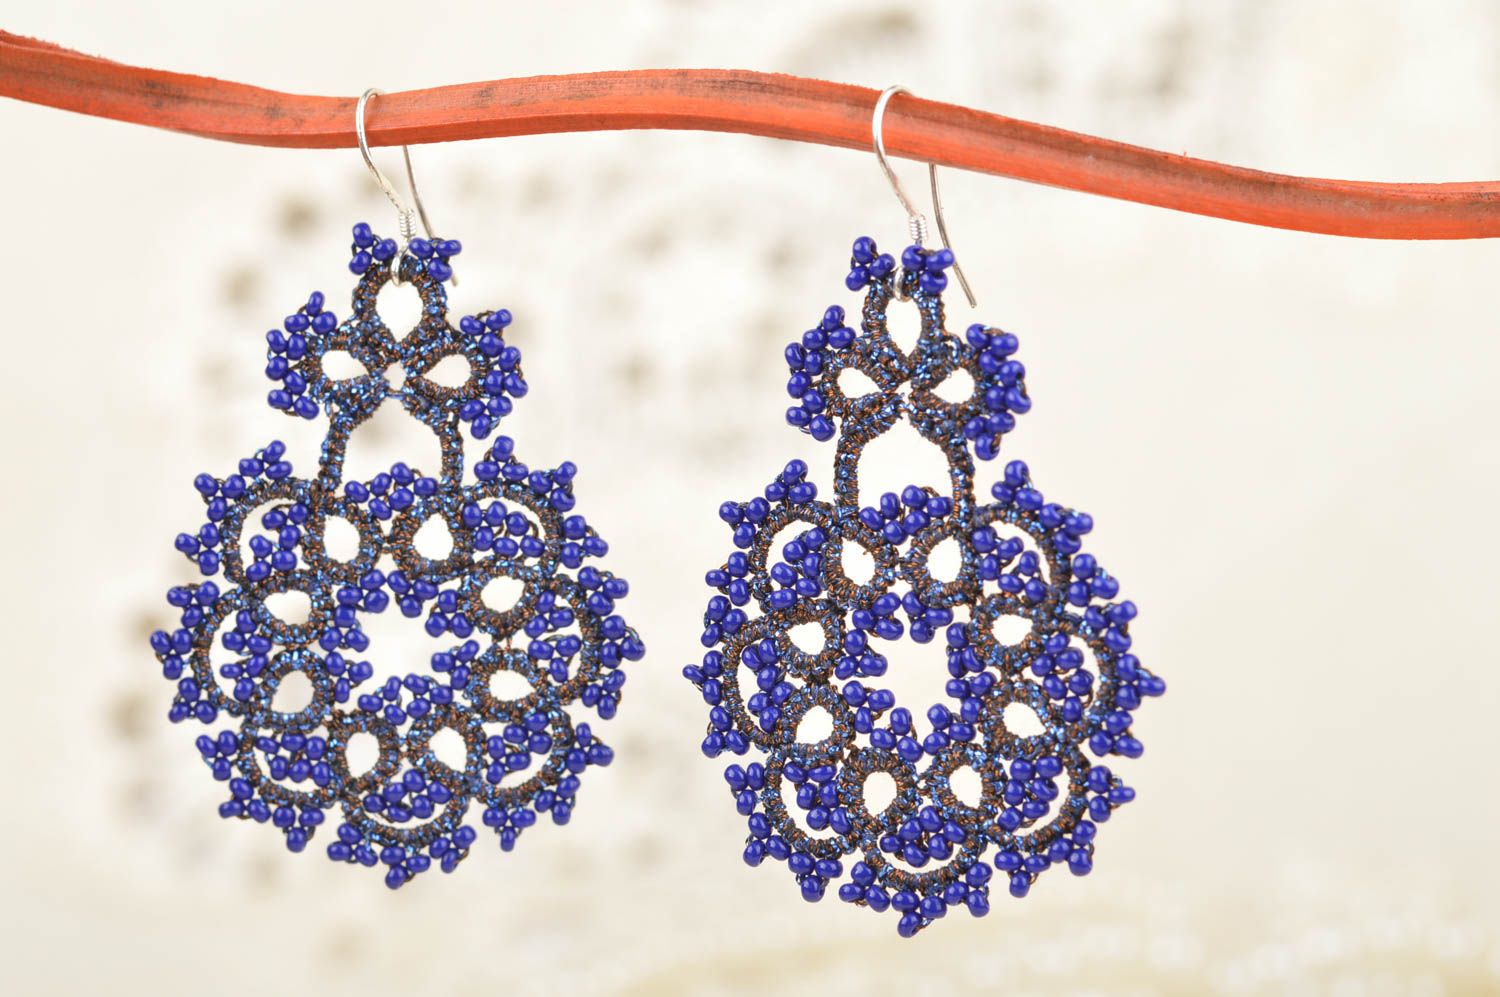 Beautiful blue handmade crohet lace earrings with beads tatting technique photo 1